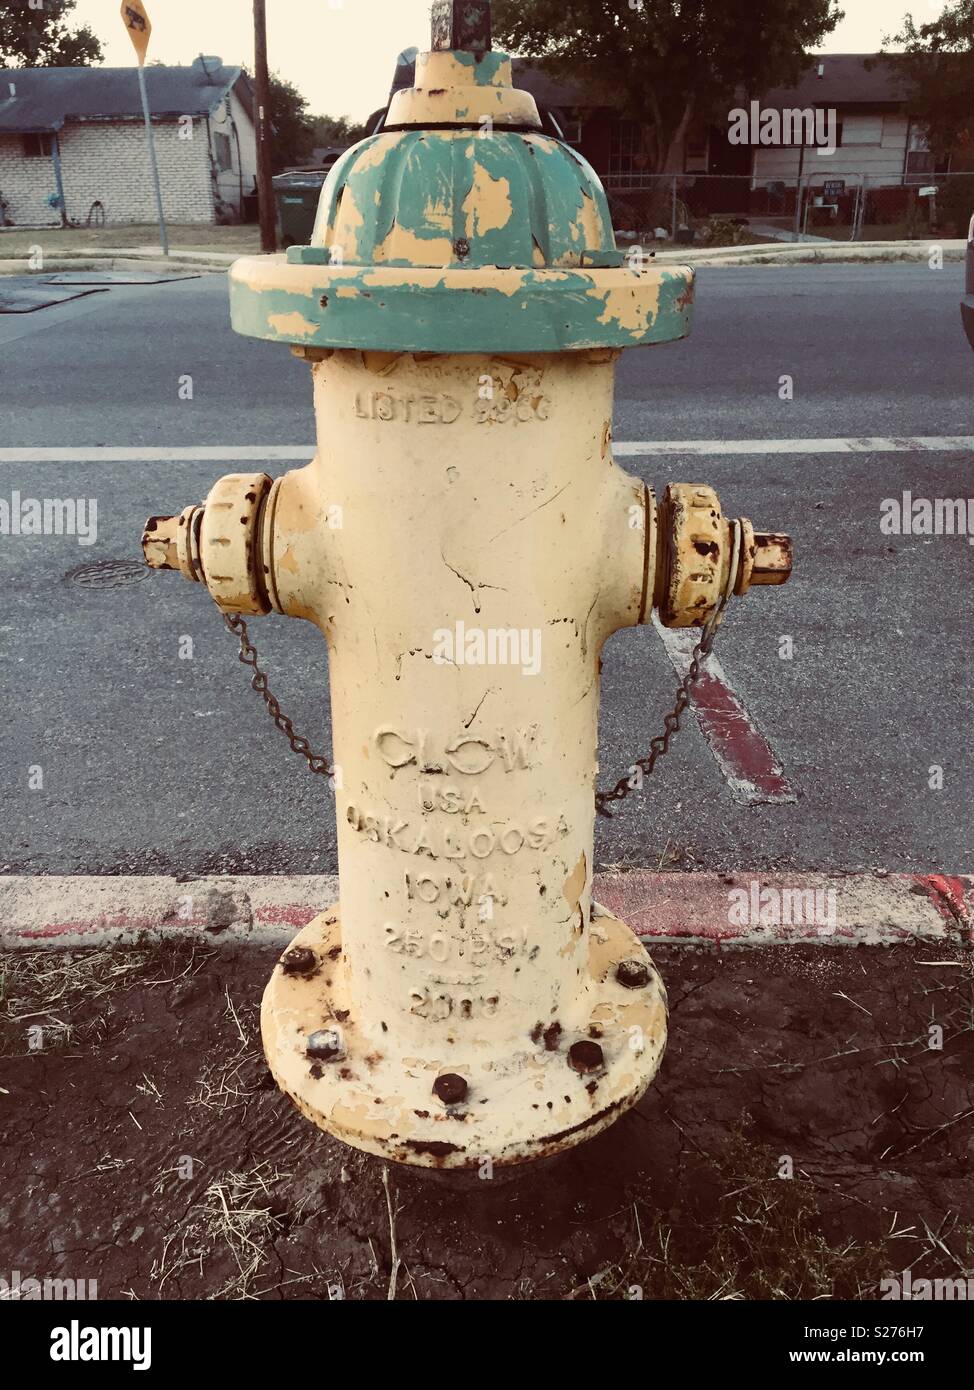 Yellow and green fire hydrant. Stock Photo